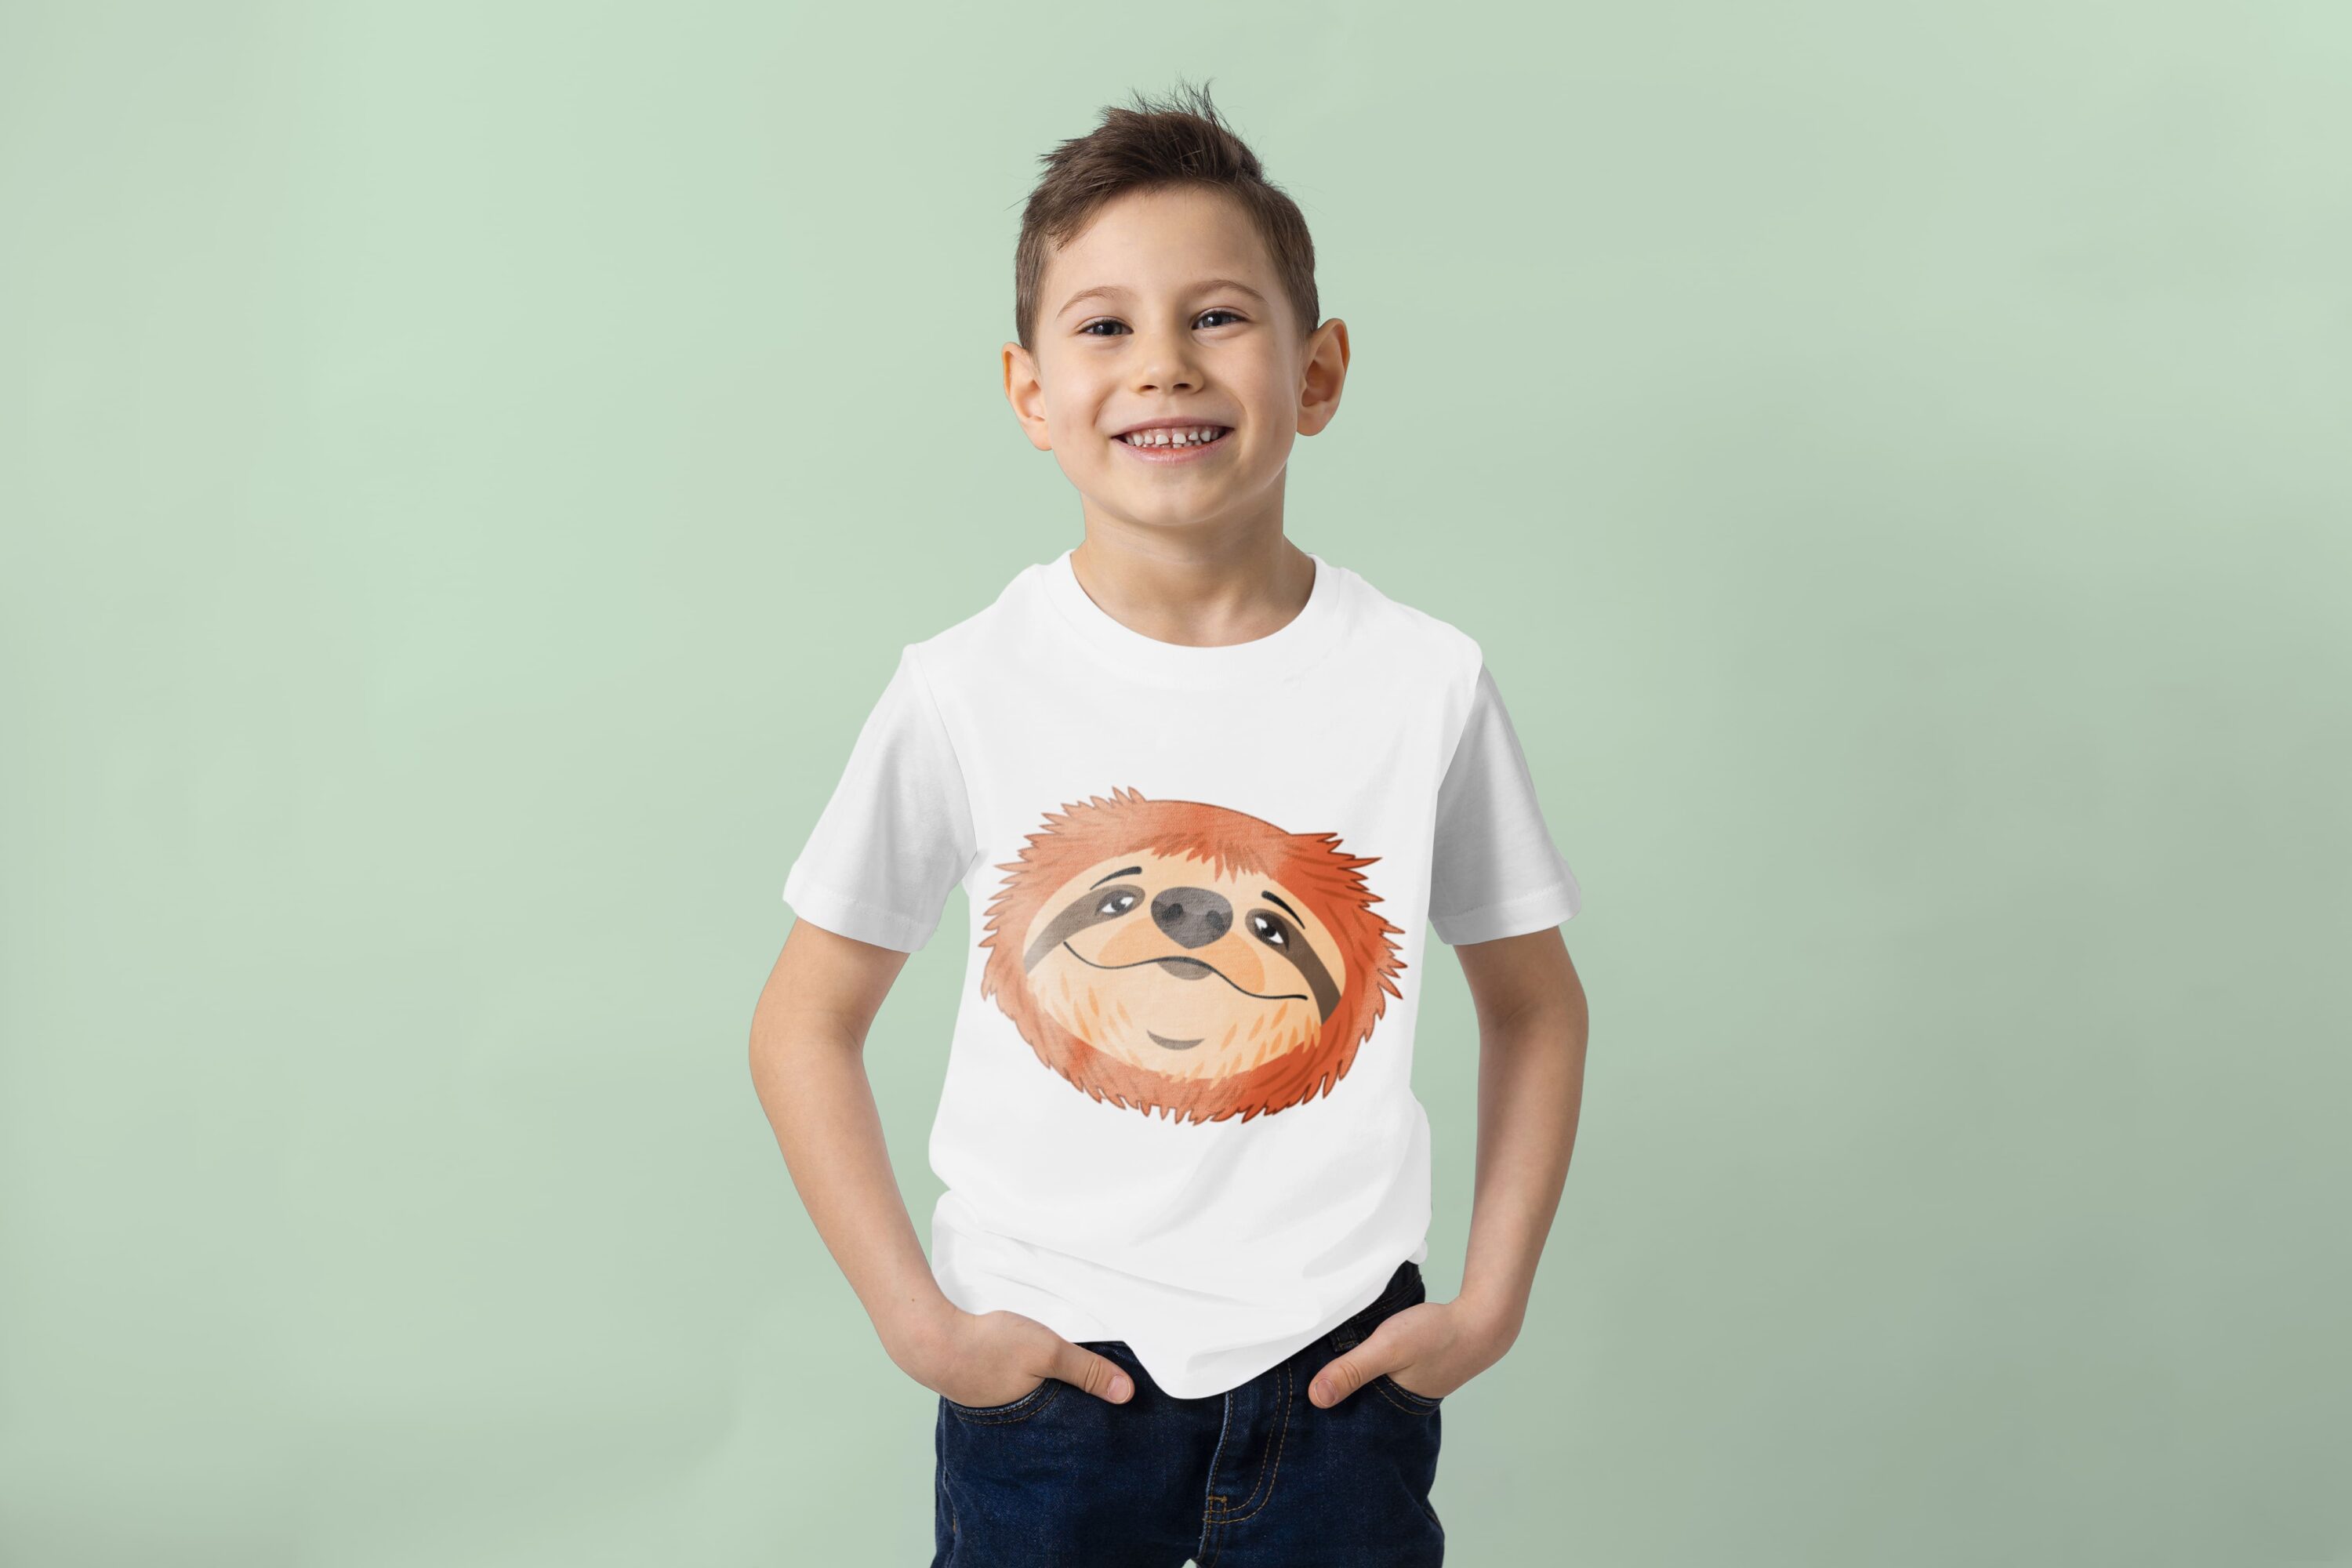 T-shirt with the image of the head of a sloth with wide-open eyes.